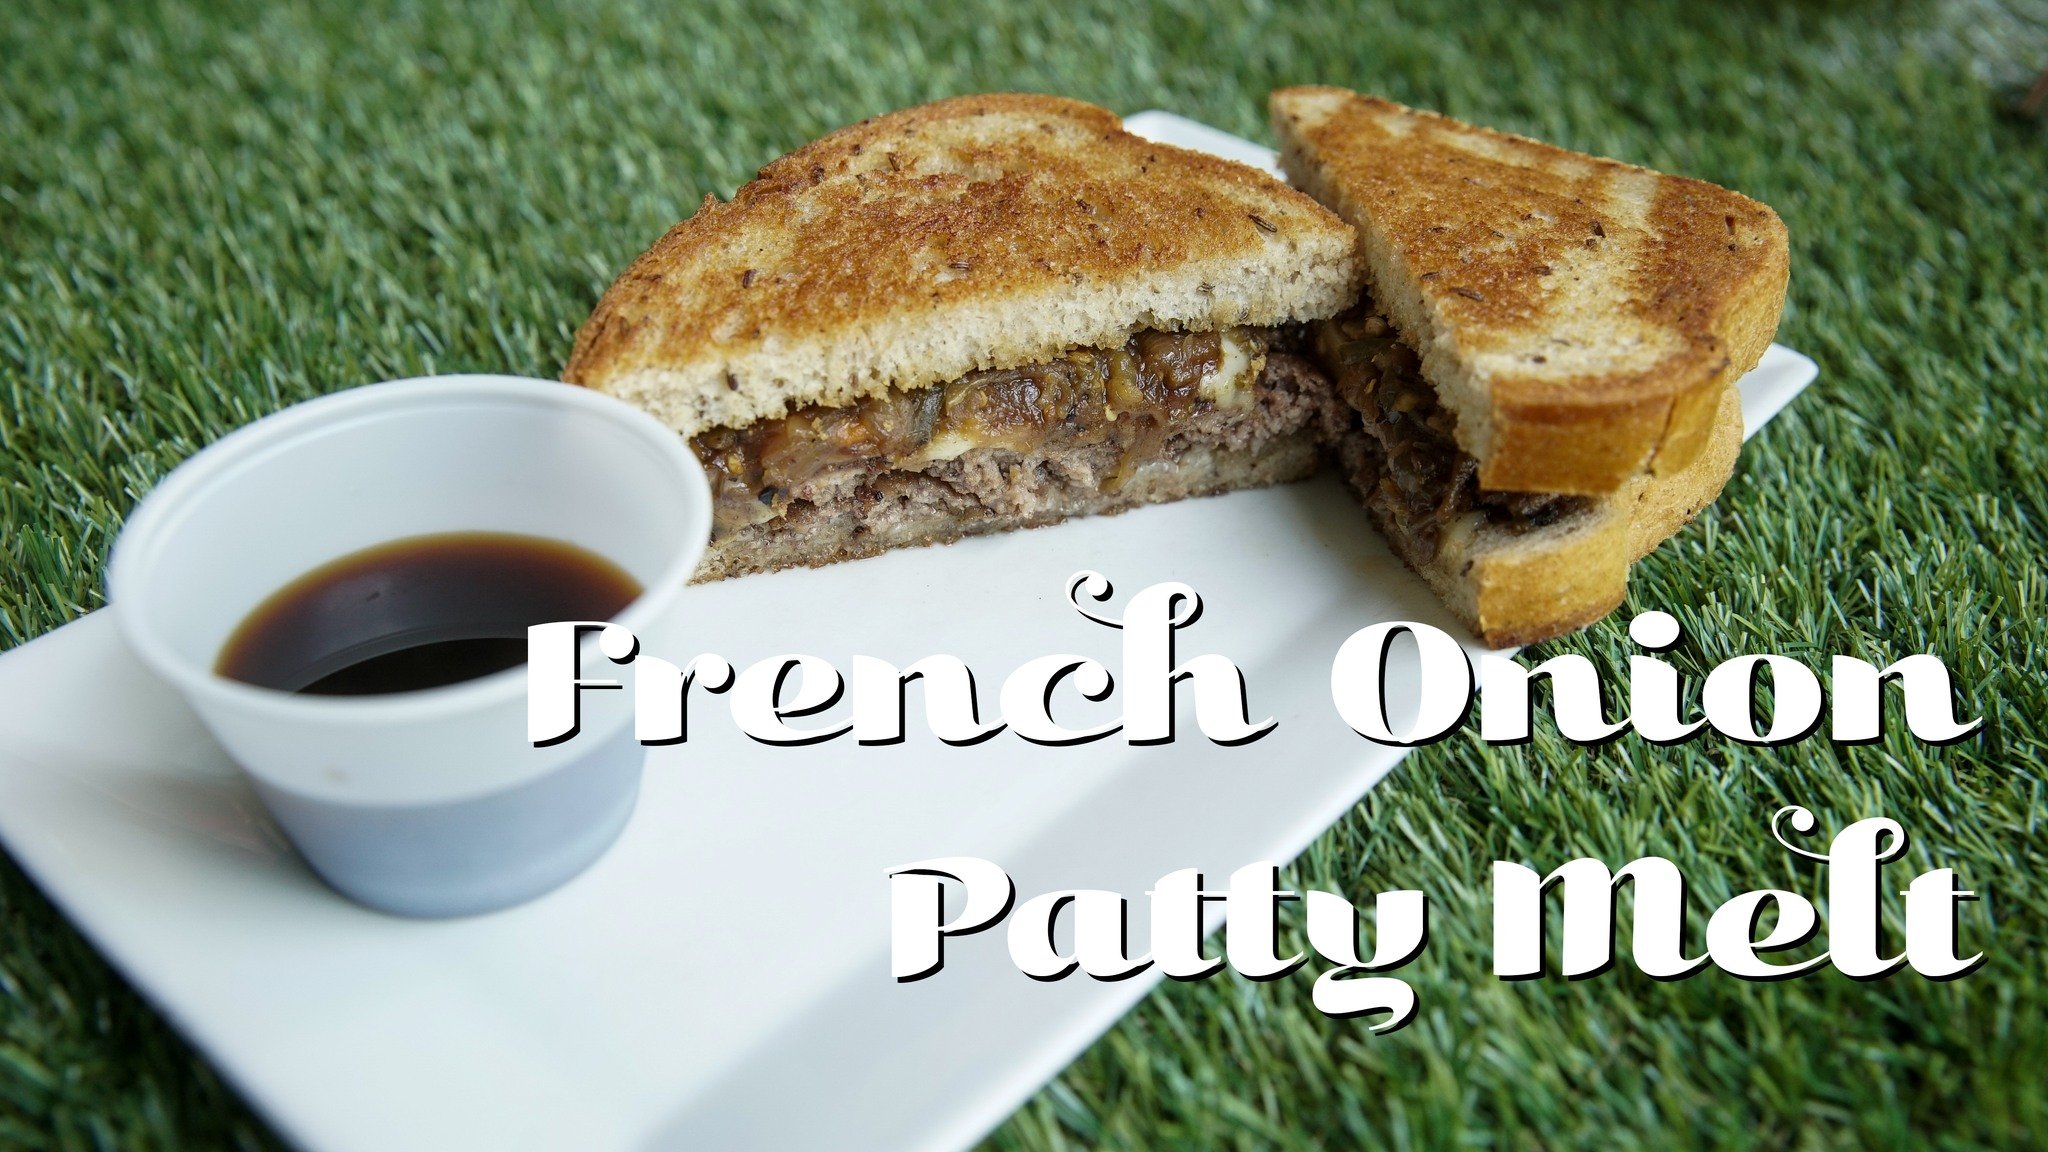 ✨May Specials Alert✨

We are bringing back some All-Stars to the lineup from the past school year. Cruise through and get your favorites before you graduate or head off to the Hamptons for the Summer...

French Onion Patty Melt - $14
Double smash pat